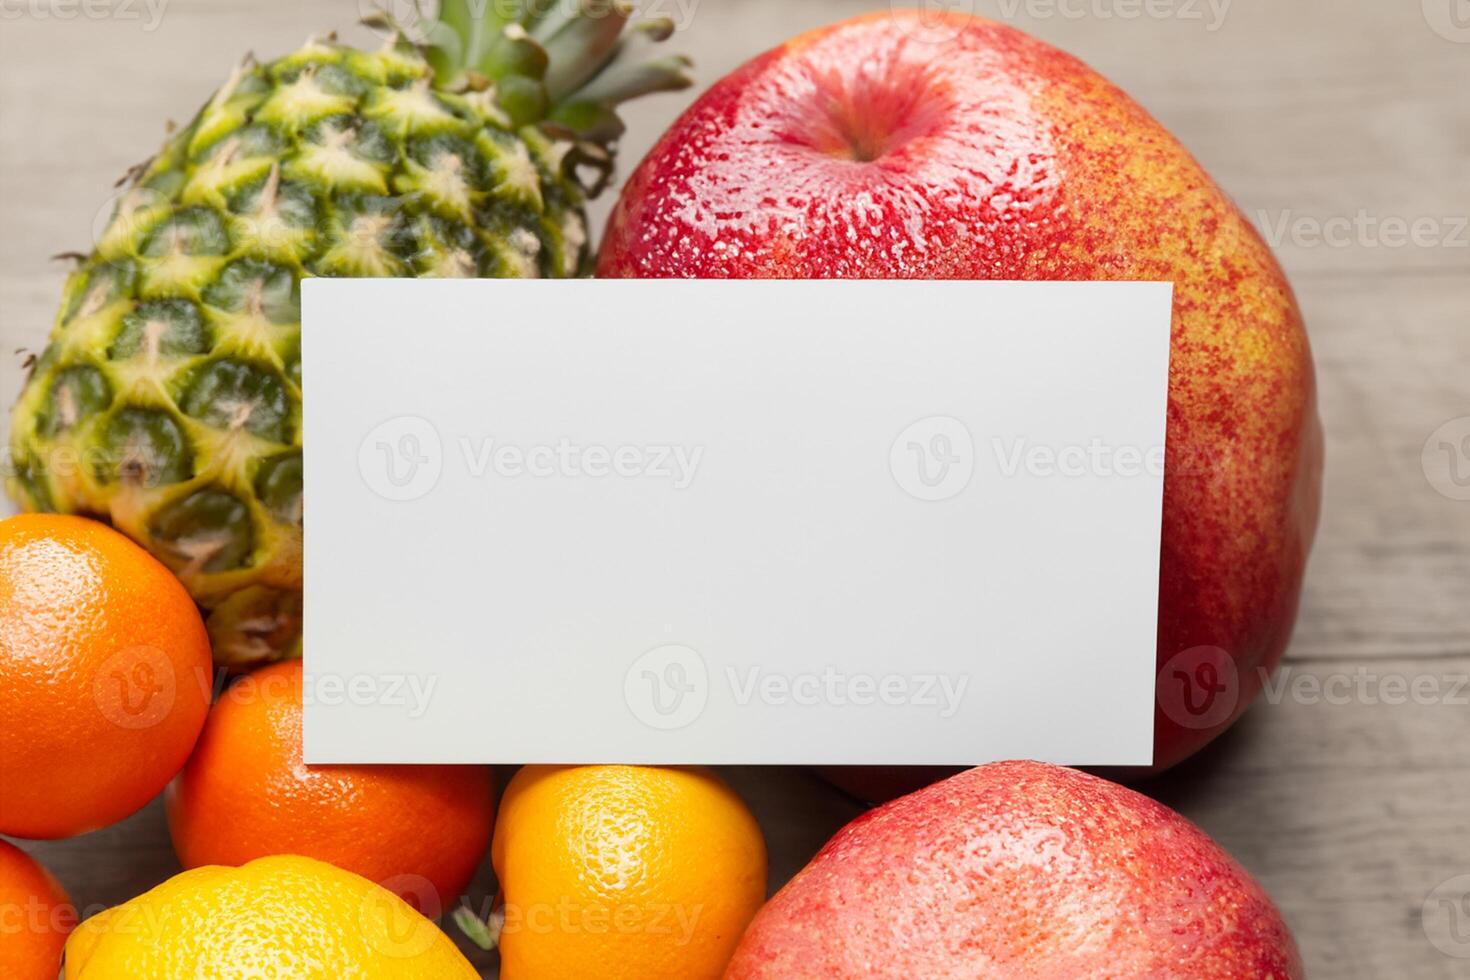 Card and White Paper Mockup Harmonized with Fresh Fruit, Crafting a Visual Symphony of Artful Design and Culinary Delight, Where Wholesome Ingredients Merge in a Feast of Vibrant Imagery photo